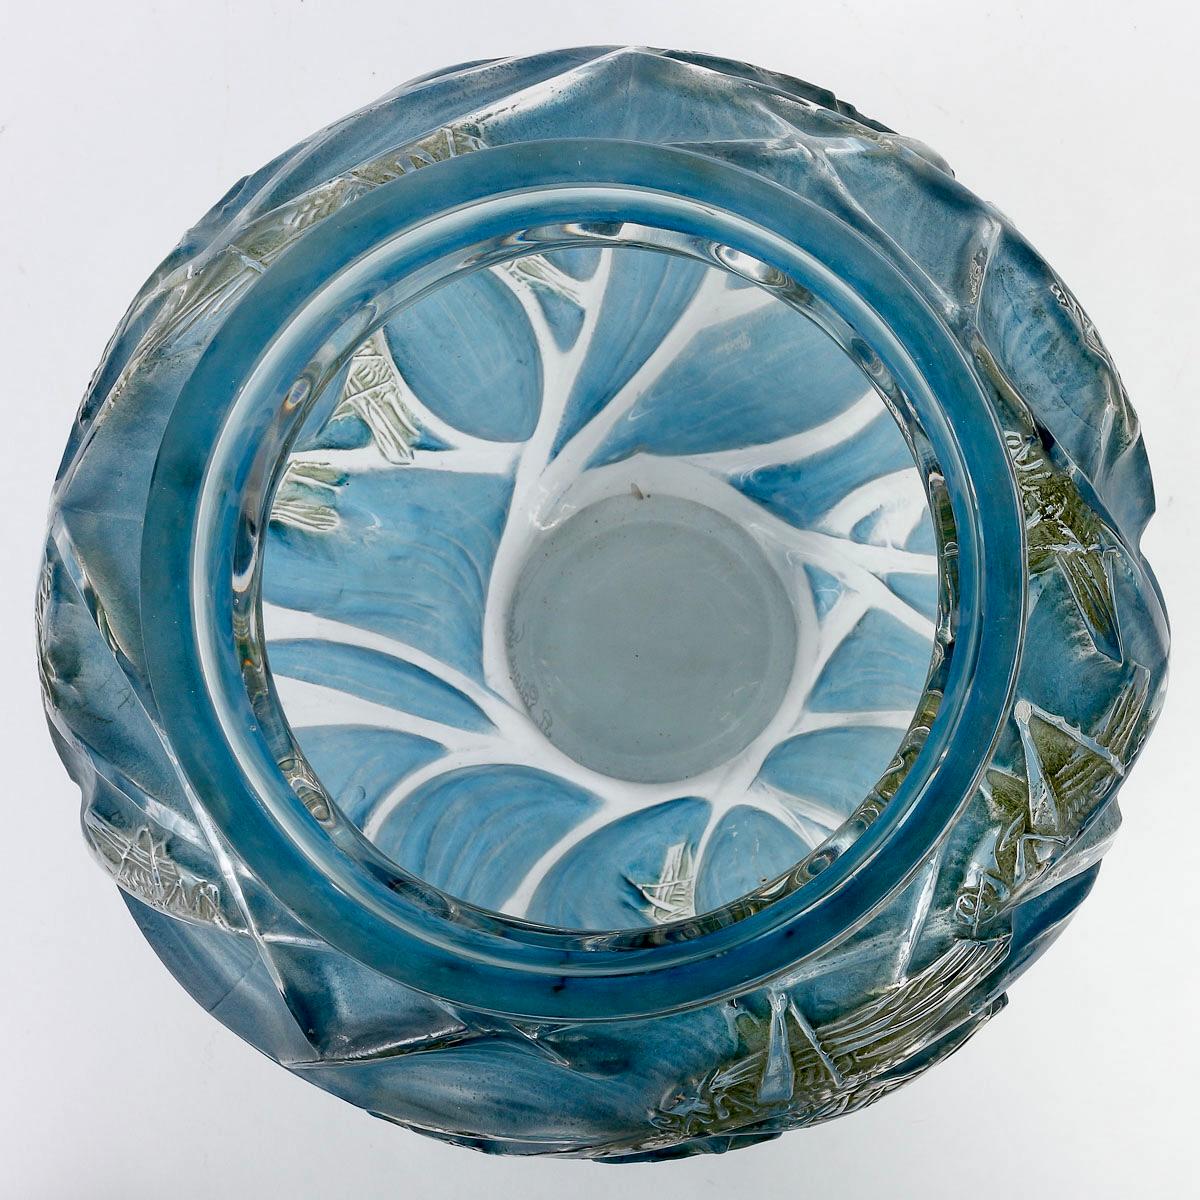 French 1912 René Lalique Vase Sauterelles Glass with Blue & Green Patina Grasshoppers